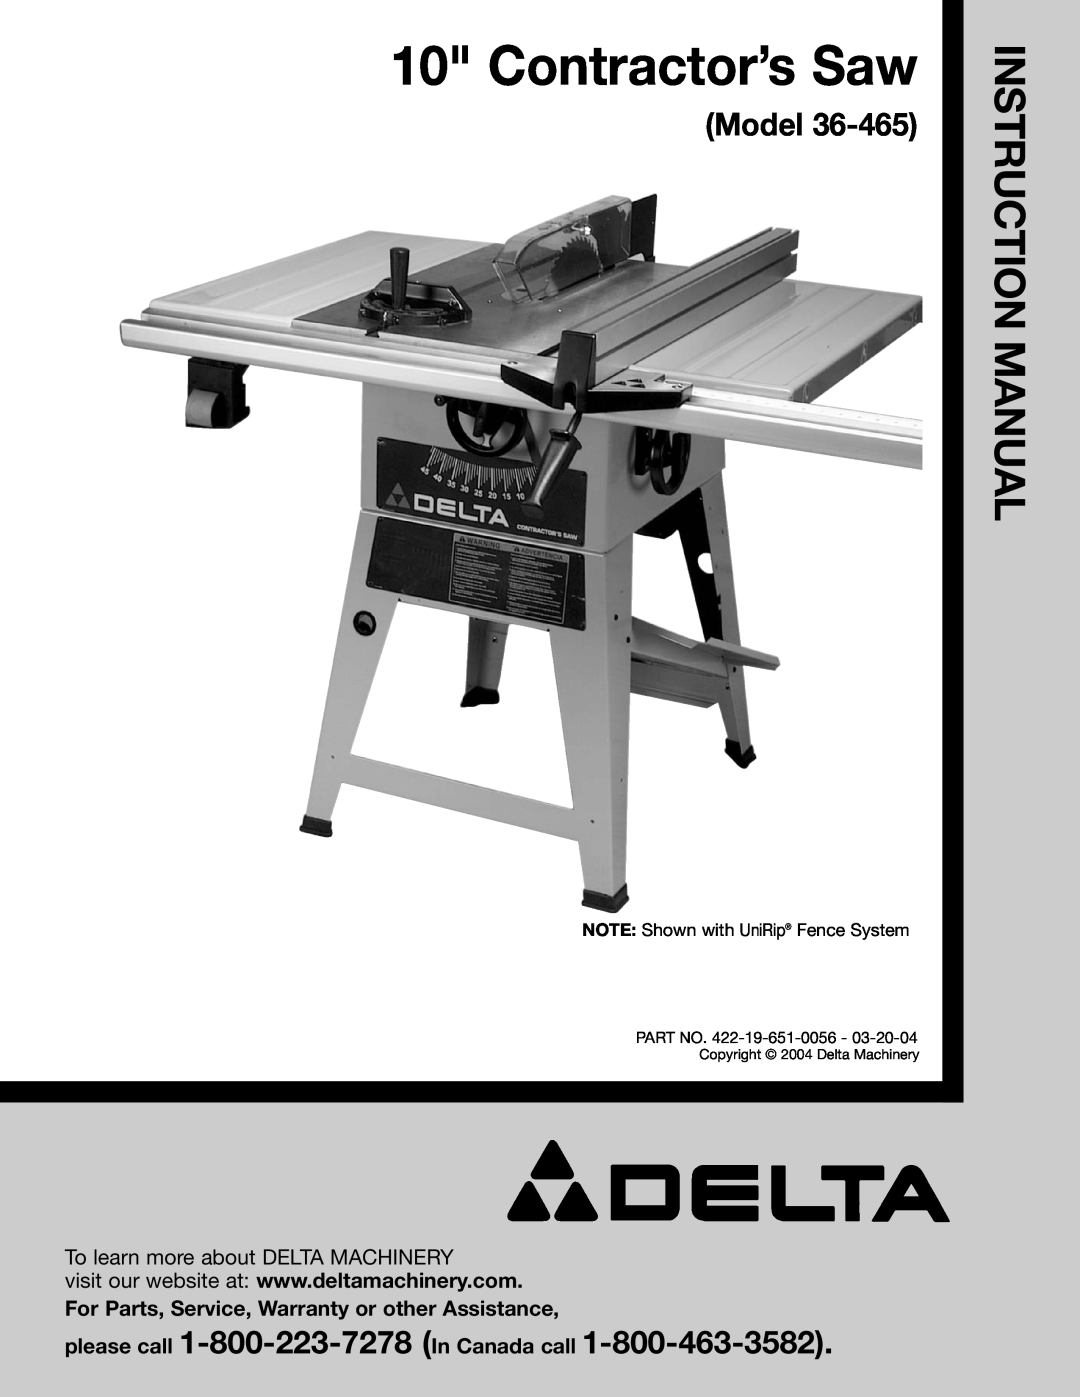 Delta 36-465 instruction manual Instruction Manual, To learn more about DELTA MACHINERY, Contractor’s Saw, Model 